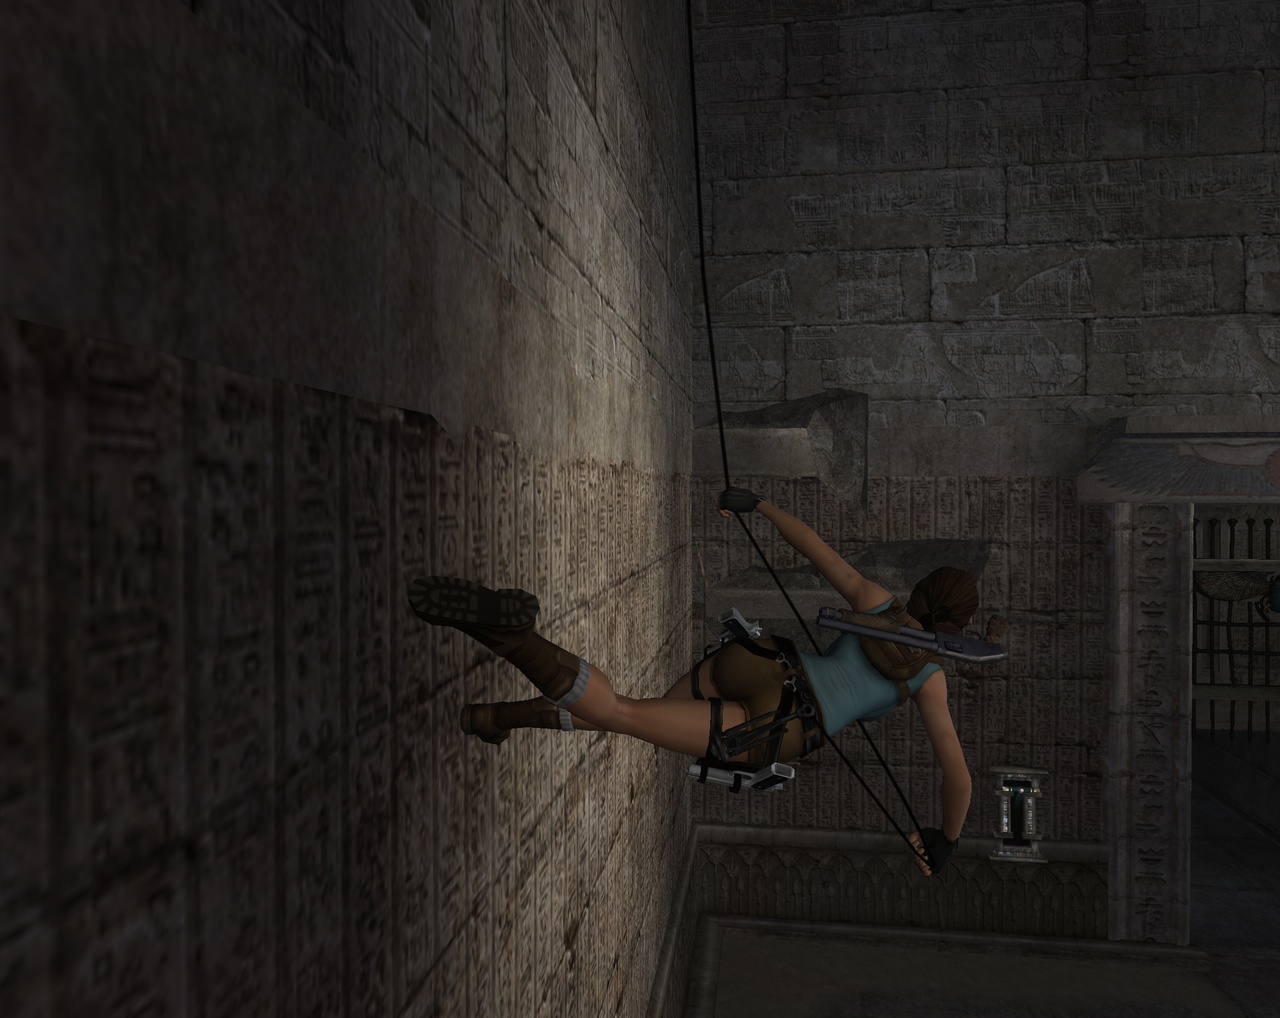 The grappling hook affords Lara access to areas that would otherwise be impossible to reach.